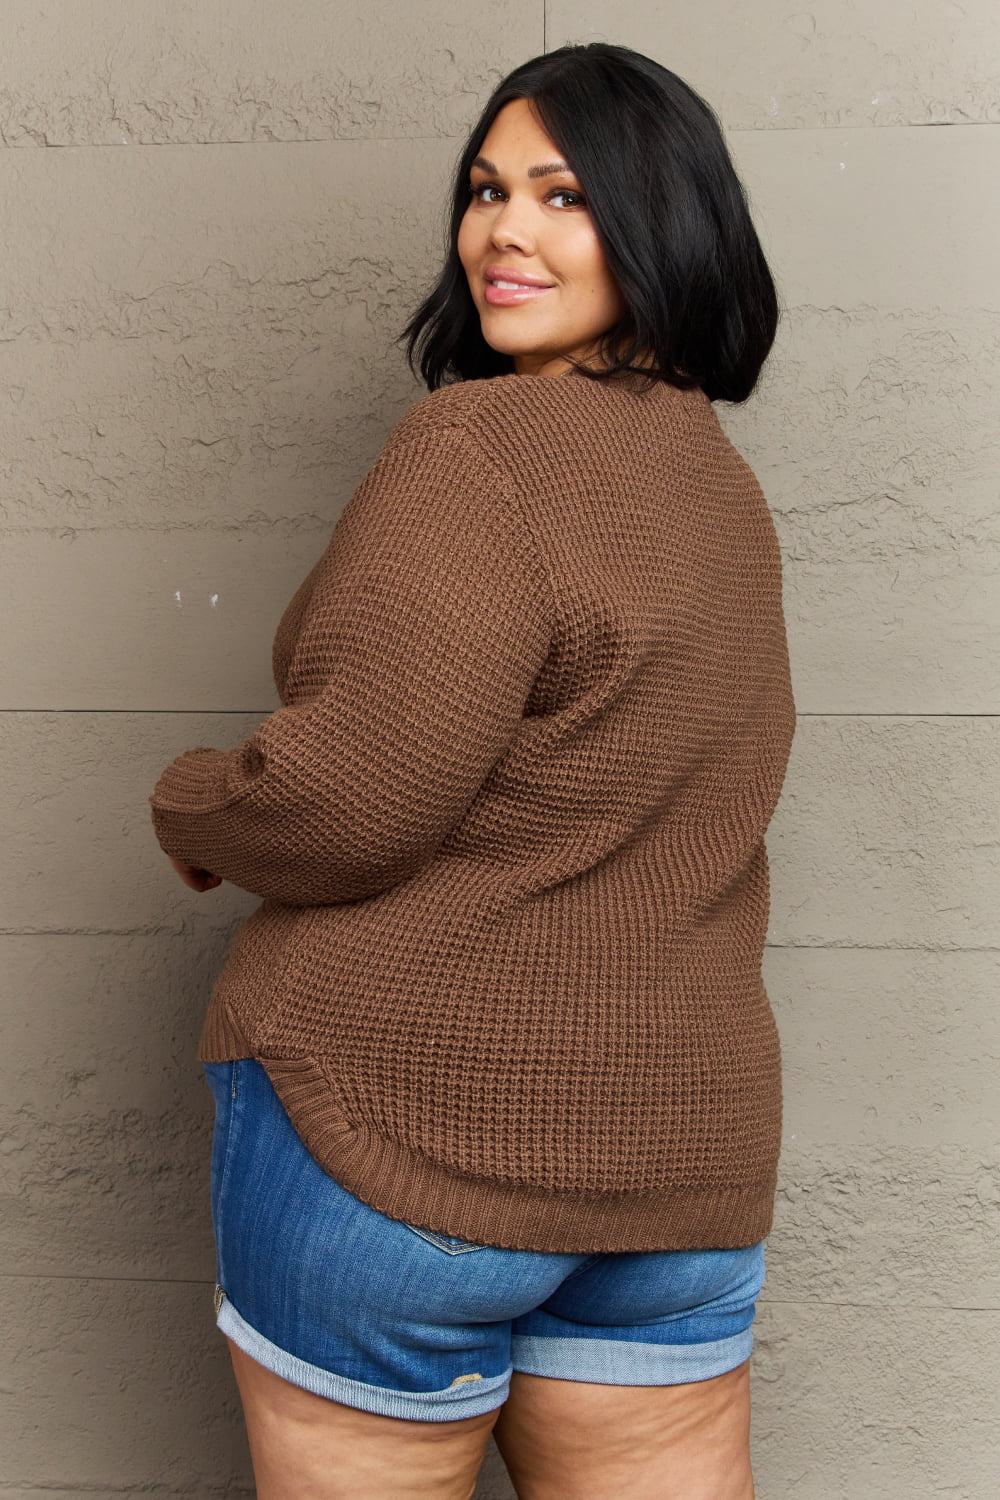 Zenana Breezy Days Plus Size High Low Waffle Knit Sweater-Sweaters/Sweatshirts-Inspired by Justeen-Women's Clothing Boutique in Chicago, Illinois